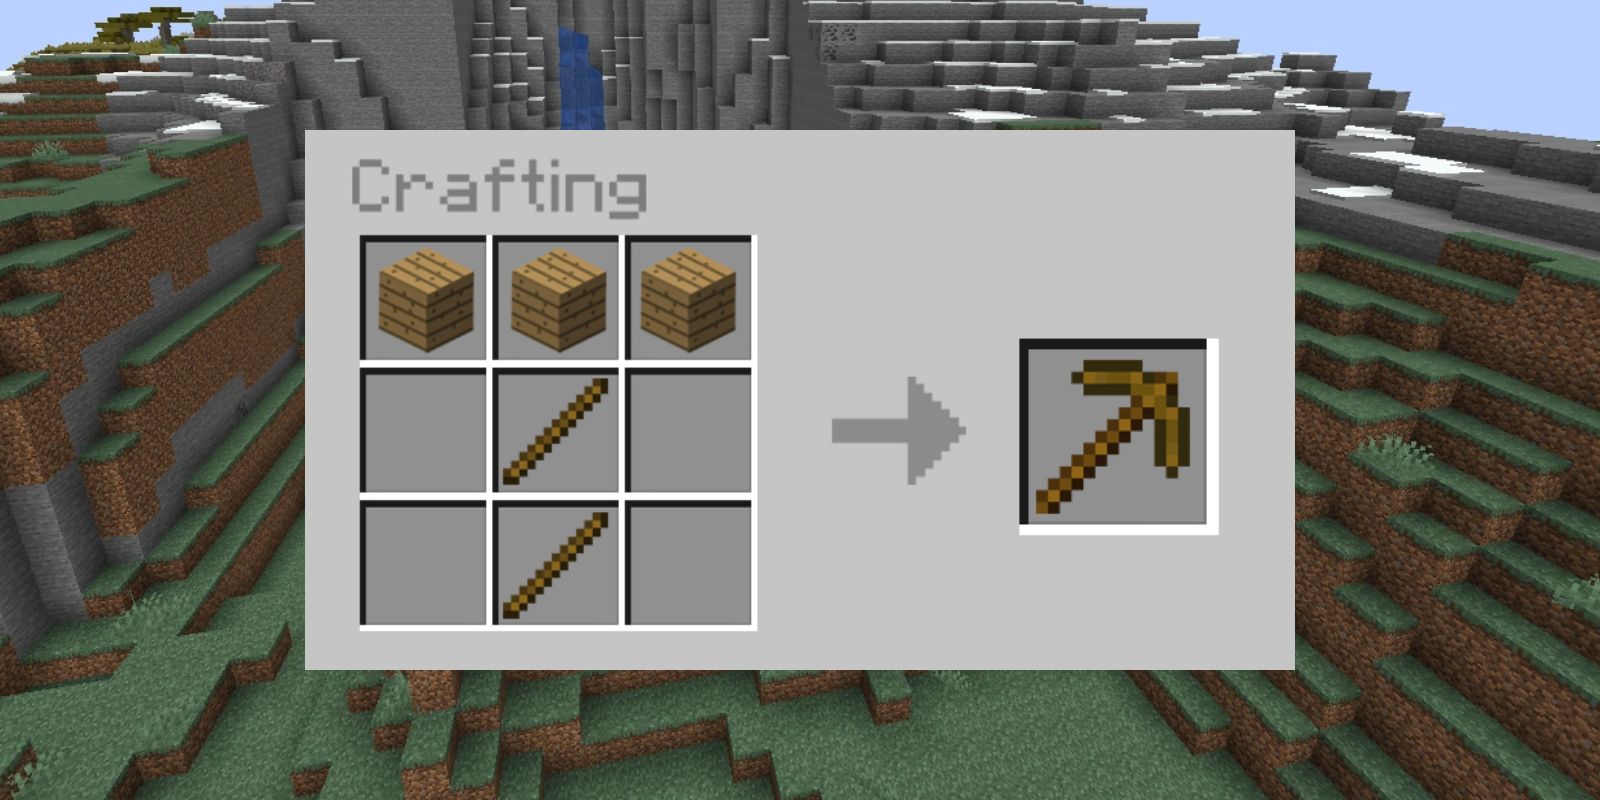 Why Minecraft's Crafting System Is More Satisfying Than Other Games